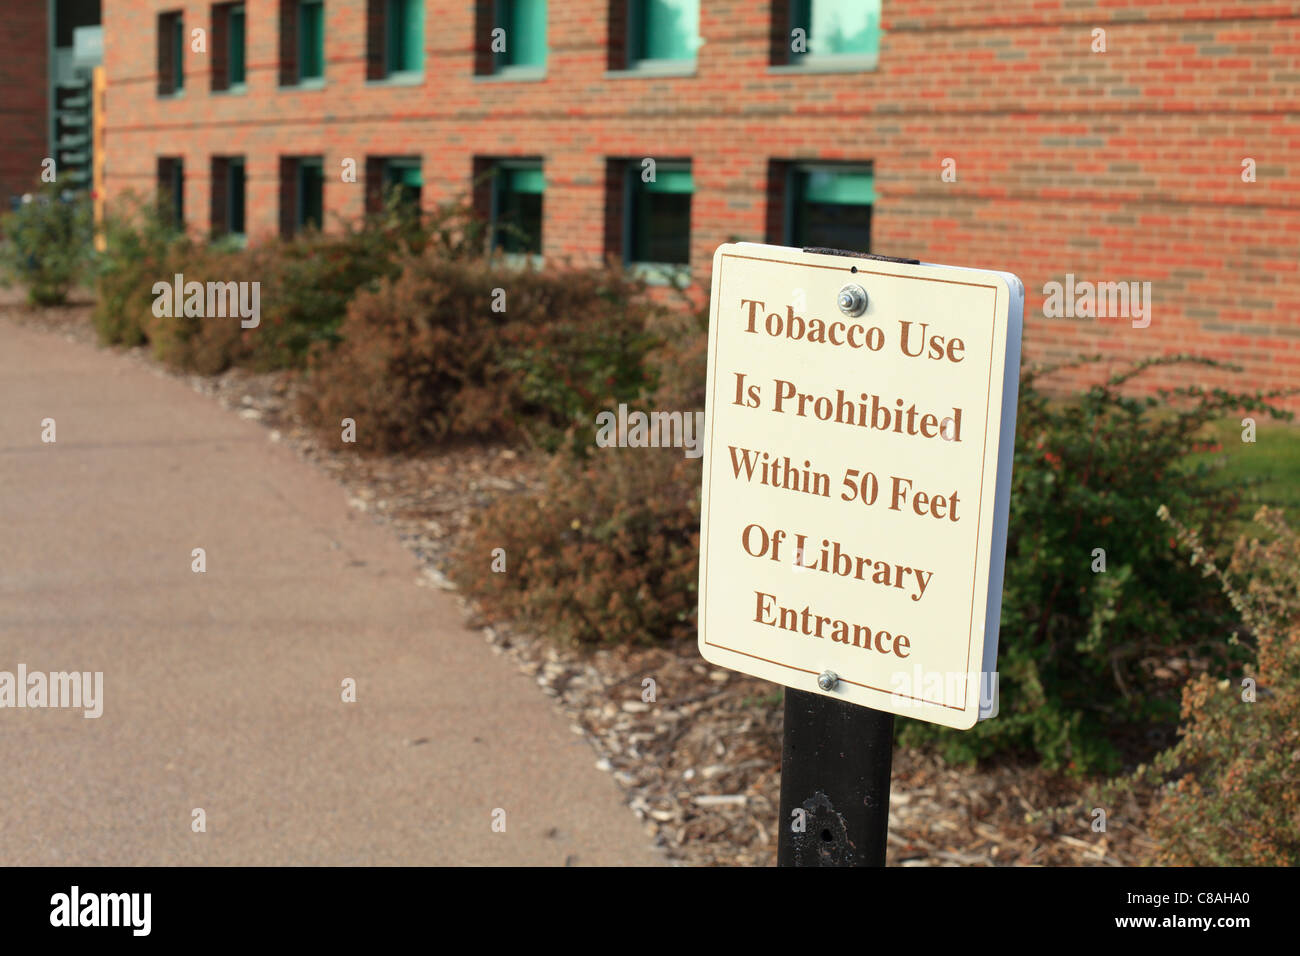 A sign reading 'Tobacco Use Is Prohibited Within 50 Feet Of Library Entrance.' Stock Photo